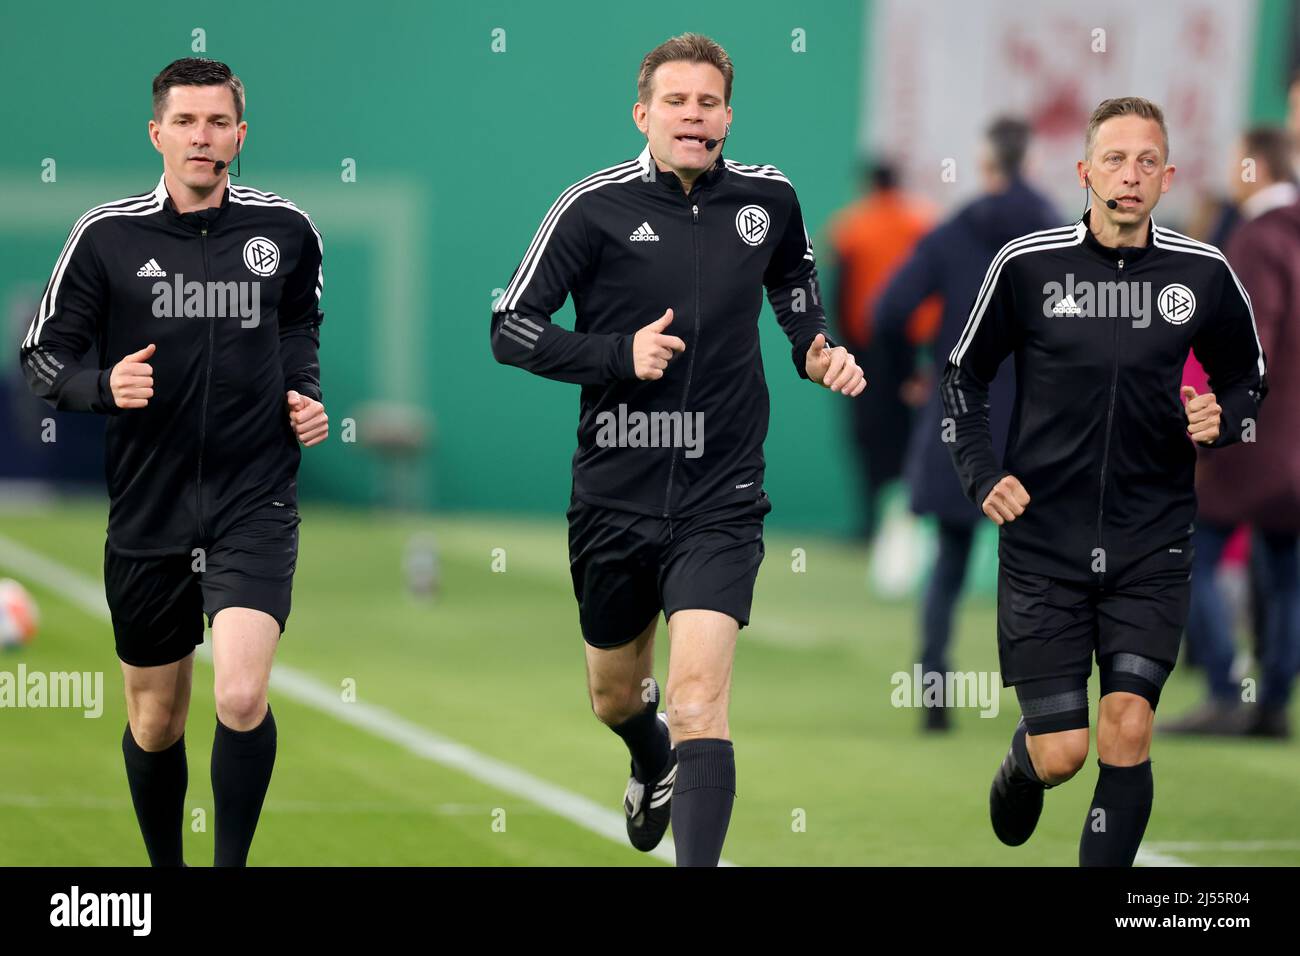 Leipzig, Germany. 20th Apr, 2022. Soccer: DFB Cup, RB Leipzig - 1. FC Union Berlin, semifinal, Red Bull Arena. Referee Felix Brych (M) warms up with his assistants Stefan Lupp (l) and Mark Borsch (r) before the game. IMPORTANT NOTE: In accordance with the regulations of the DFL Deutsche Fußball Liga and the DFB Deutscher Fußball-Bund, it is prohibited to use or have used photographs taken in the stadium and/or of the match in the form of sequence pictures and/or video-like photo series. Credit: Jan Woitas/dpa/Alamy Live News Stock Photo